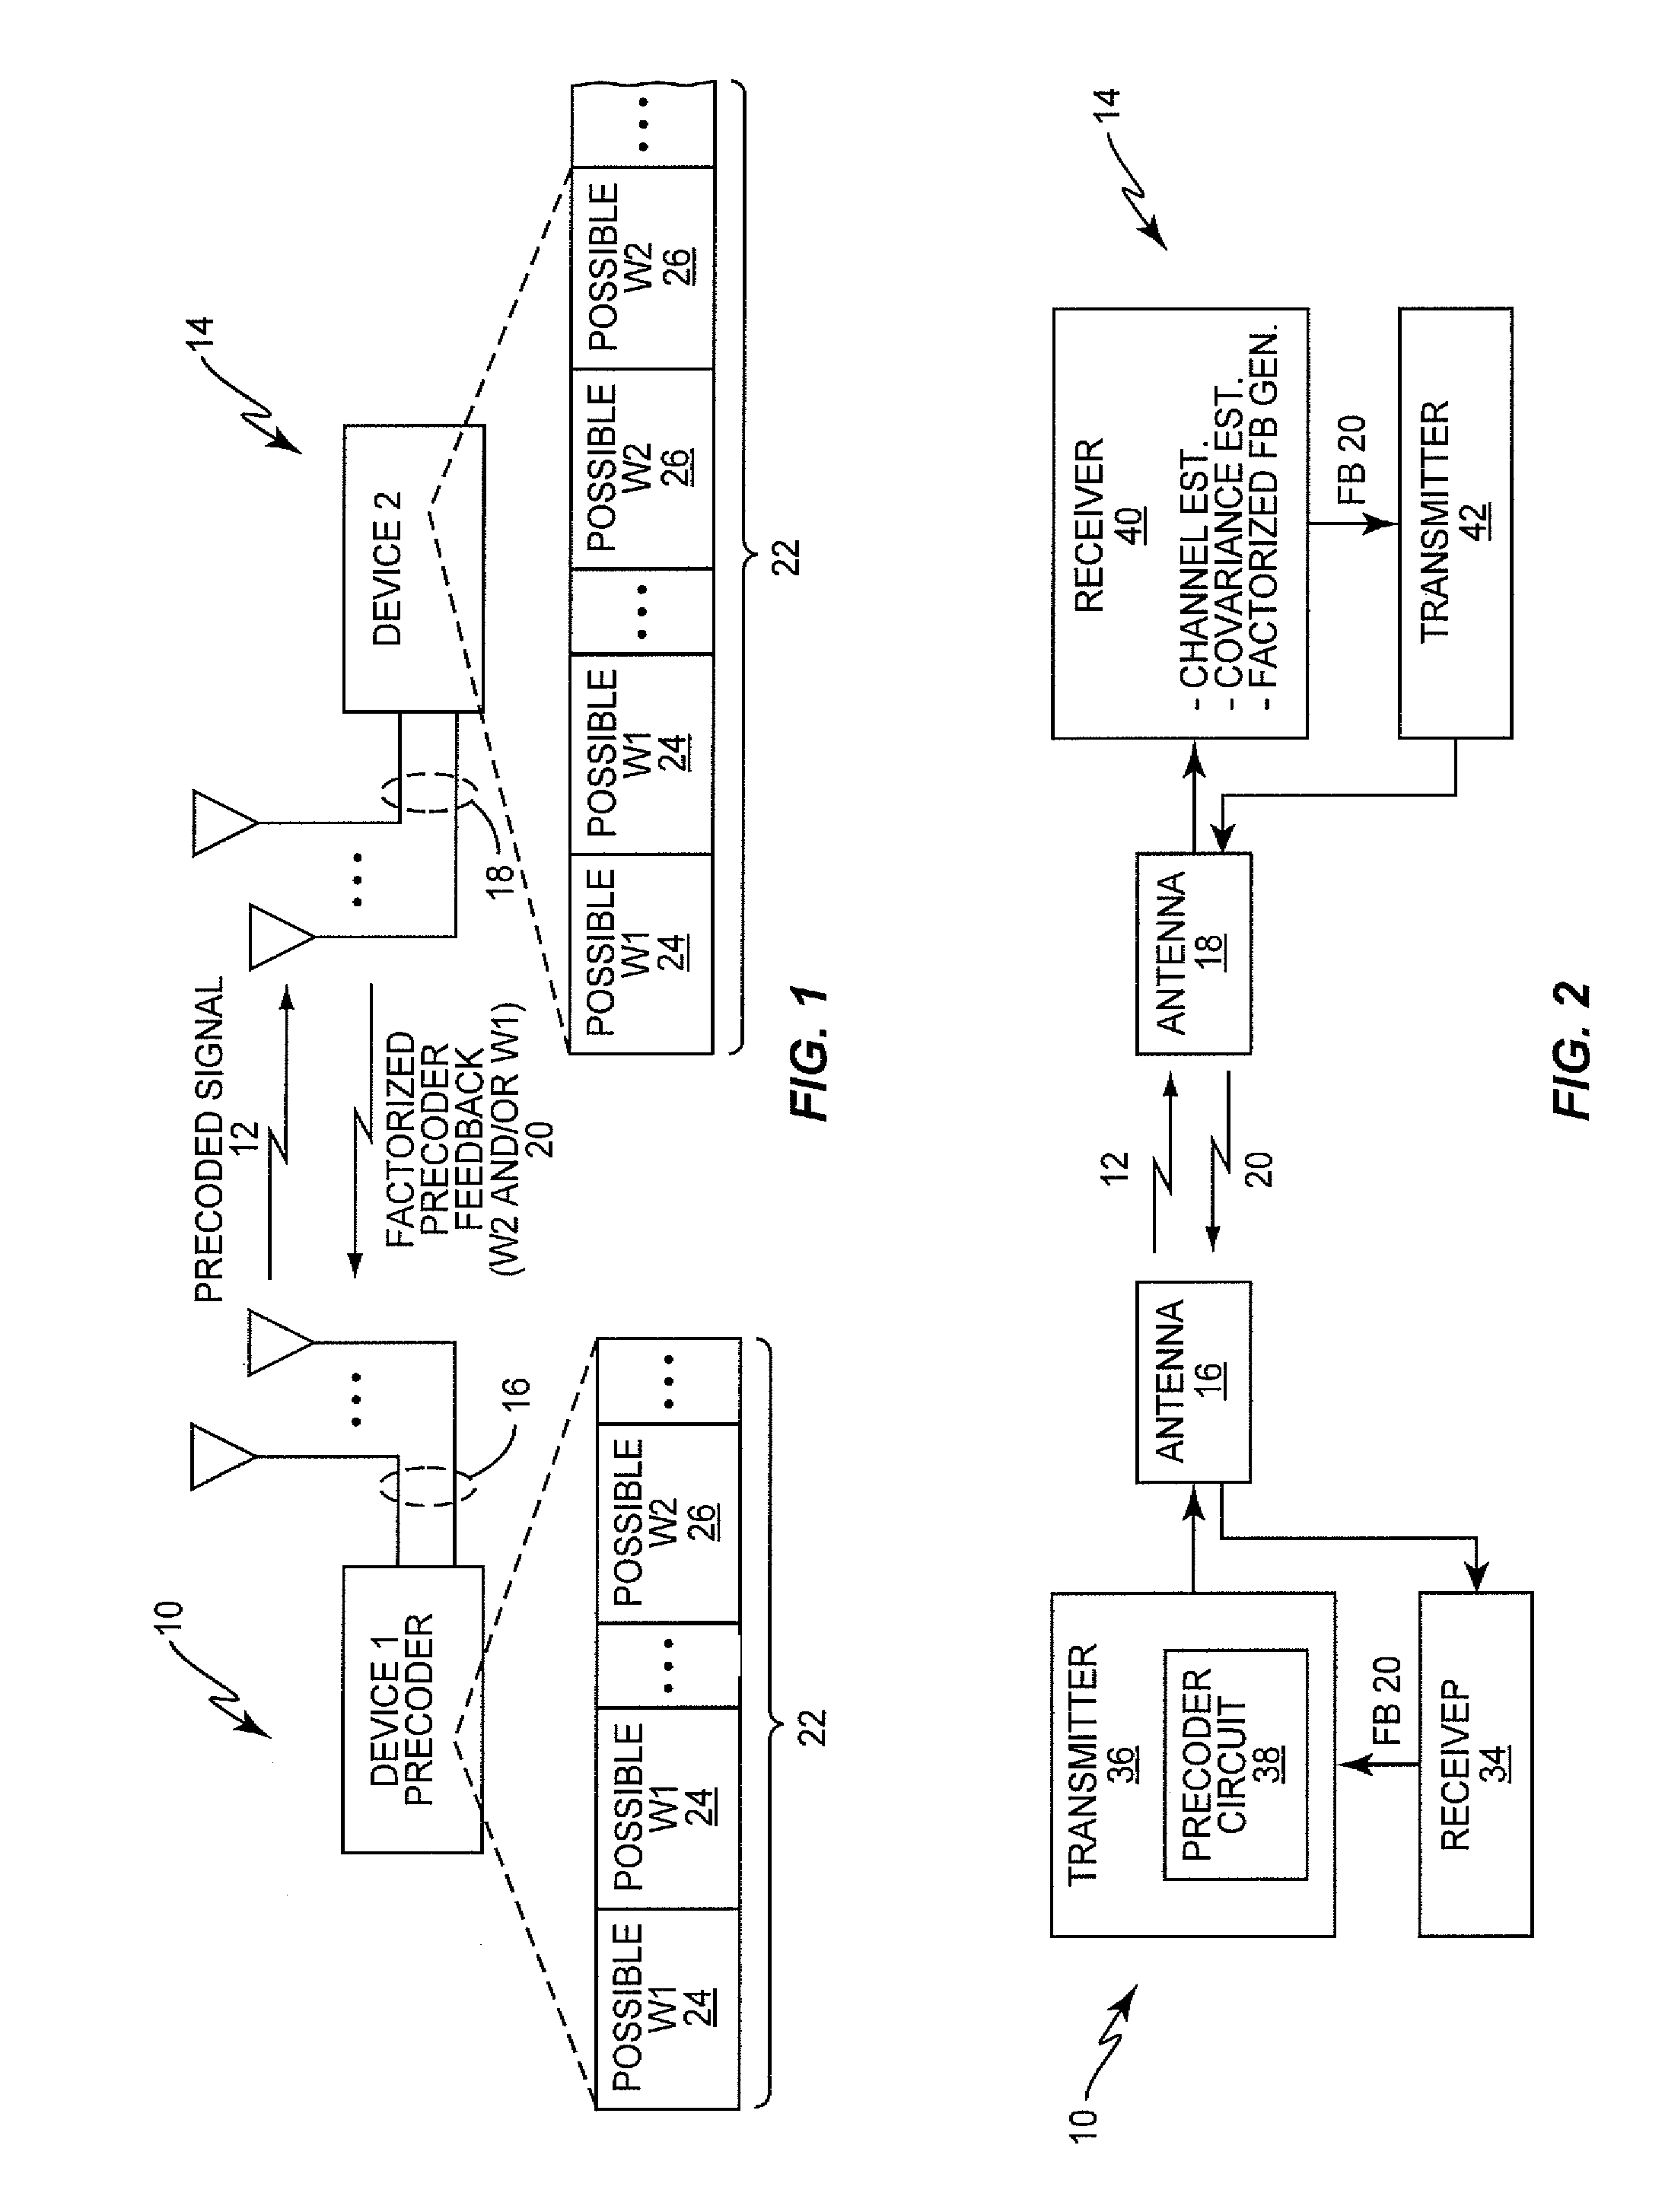 Method and apparatus for using factorized precoding